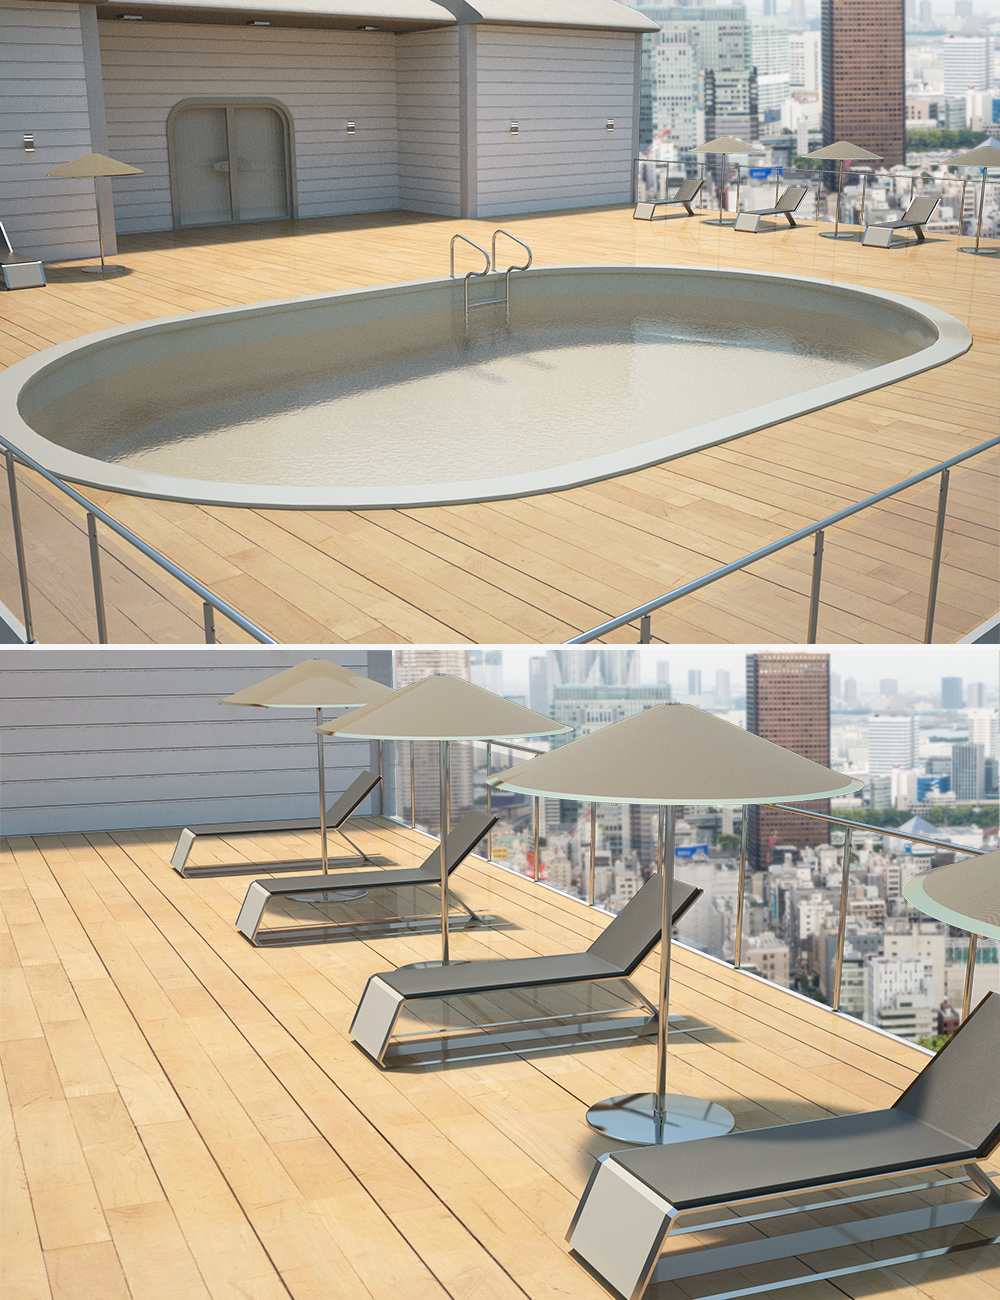 Utopia Balcony with Pool by: , 3D Models by Daz 3D